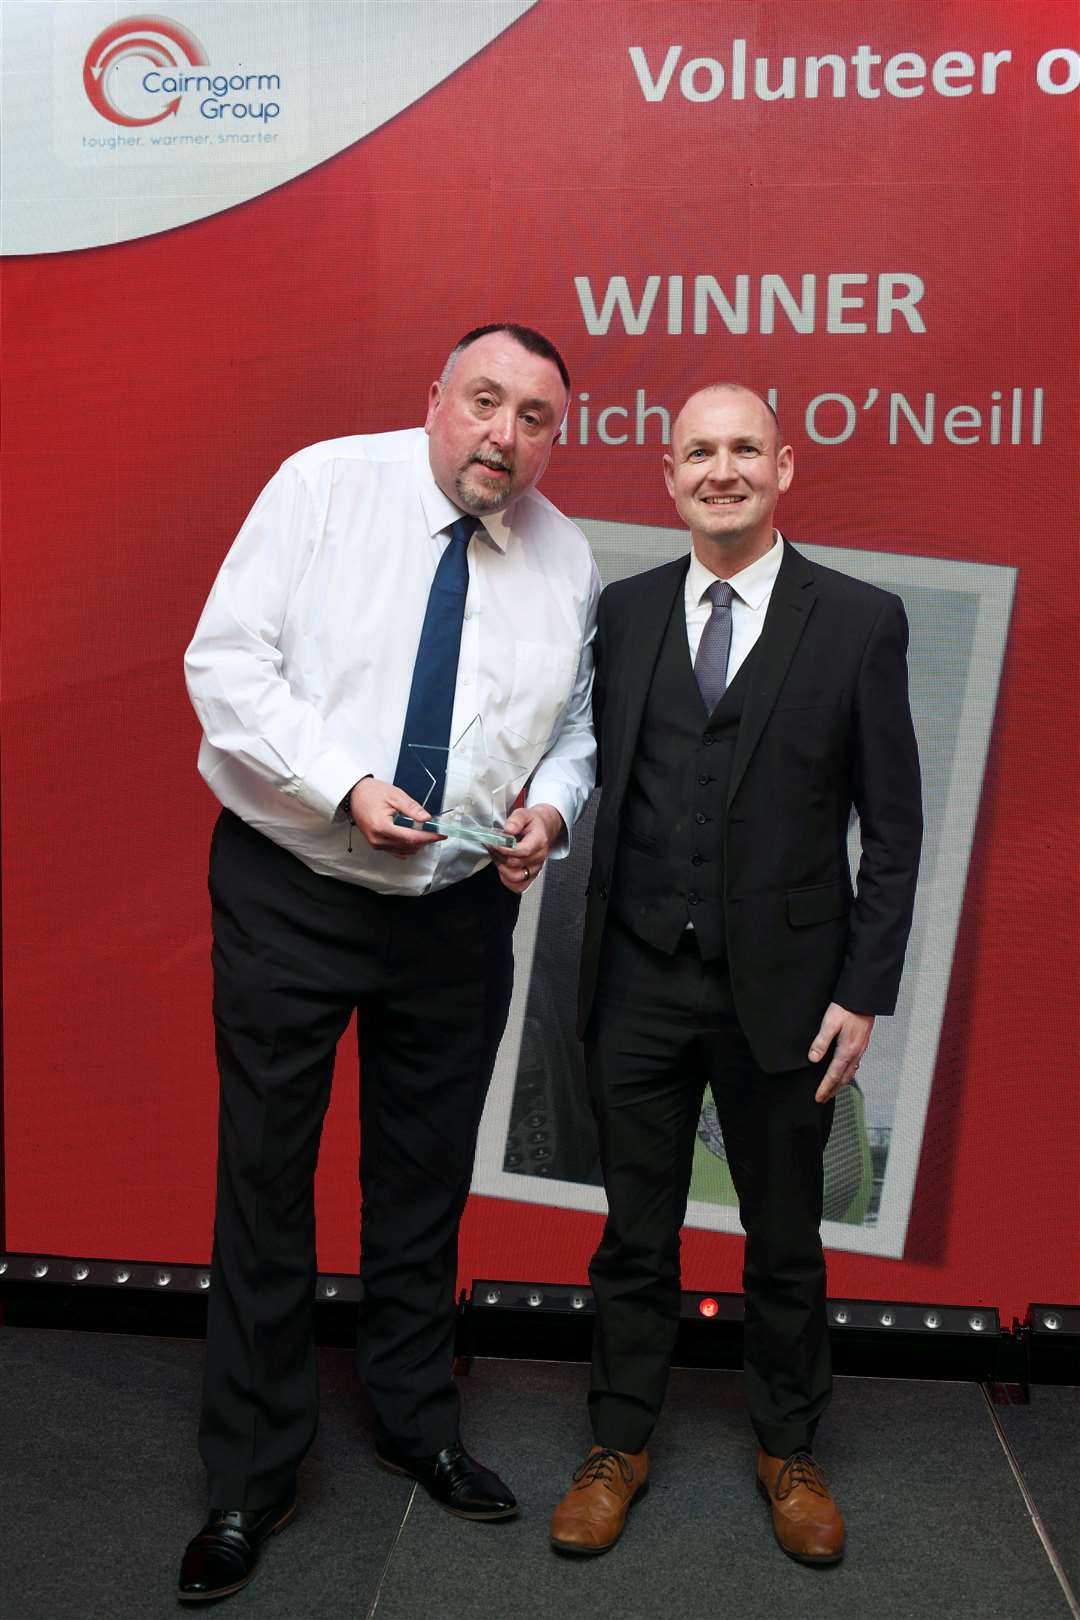 Michael O'Neill won the Volunteer Award sponsored by Cairngorm Group. Picture: James Mackenzie.